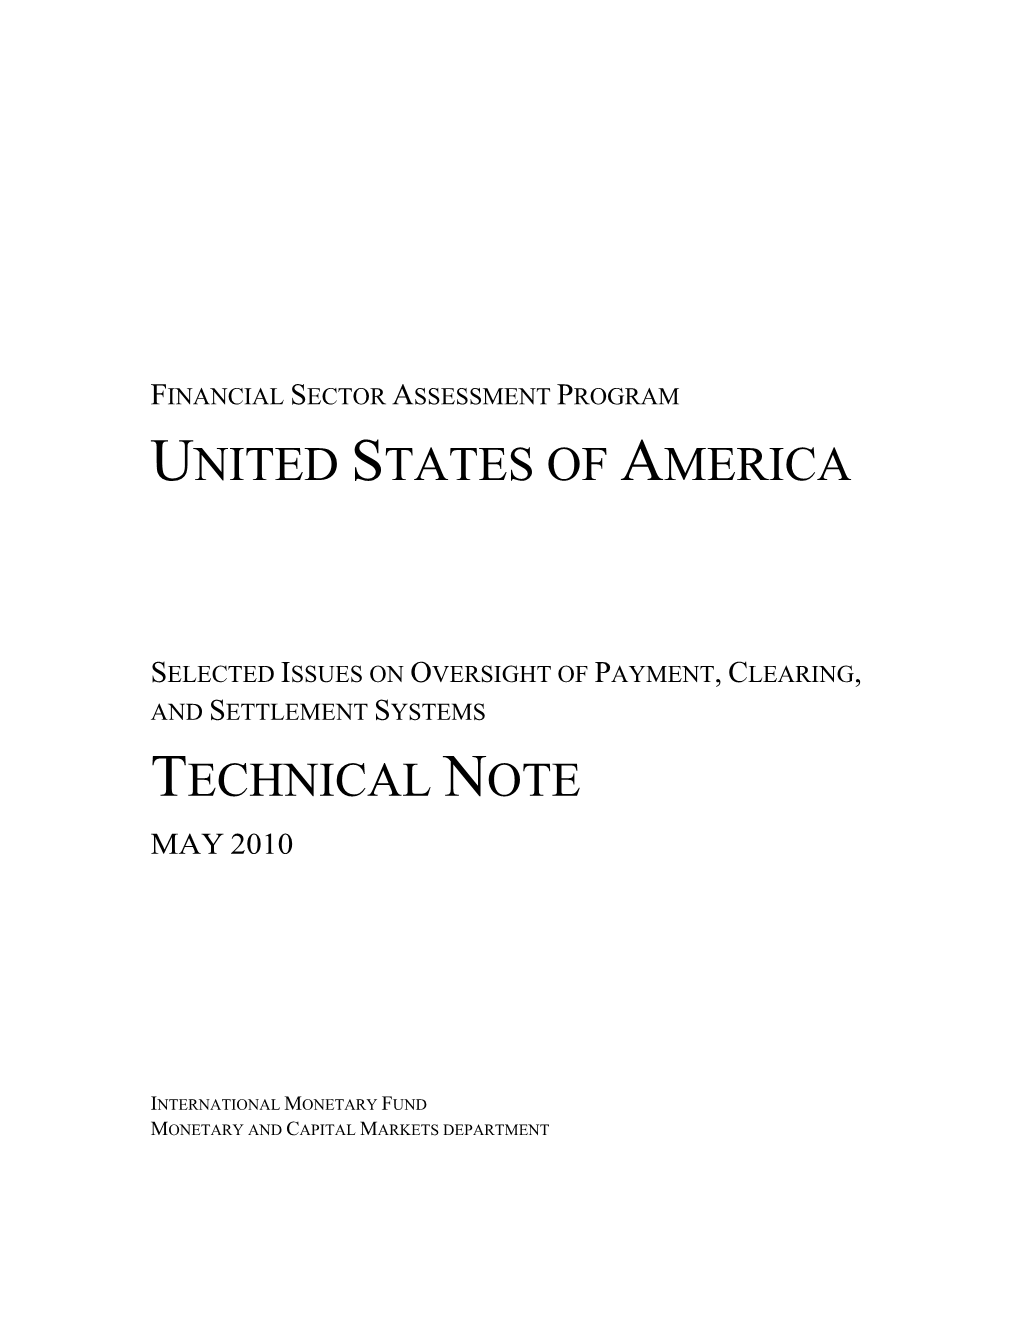 United States of America Technical Note